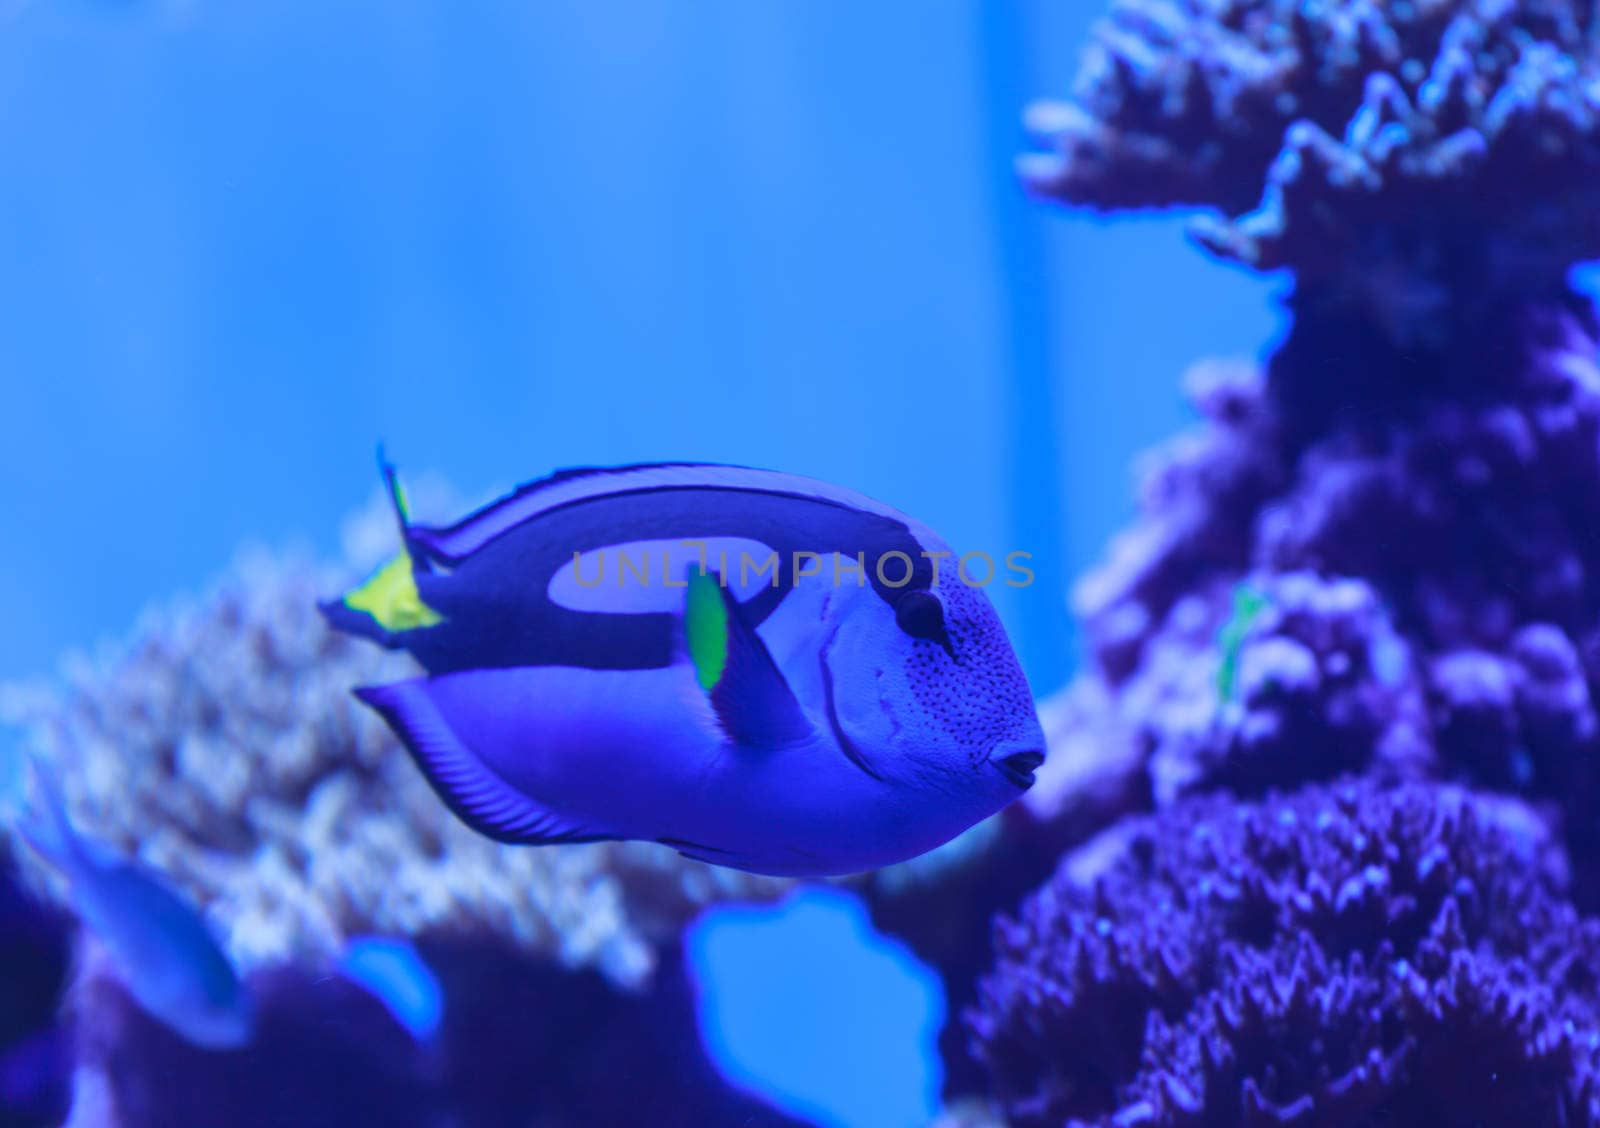 Palette tang fish, Paracanthurus hepatus, is also called the royal blue tang and can be found on a tropical reef in the ocean.